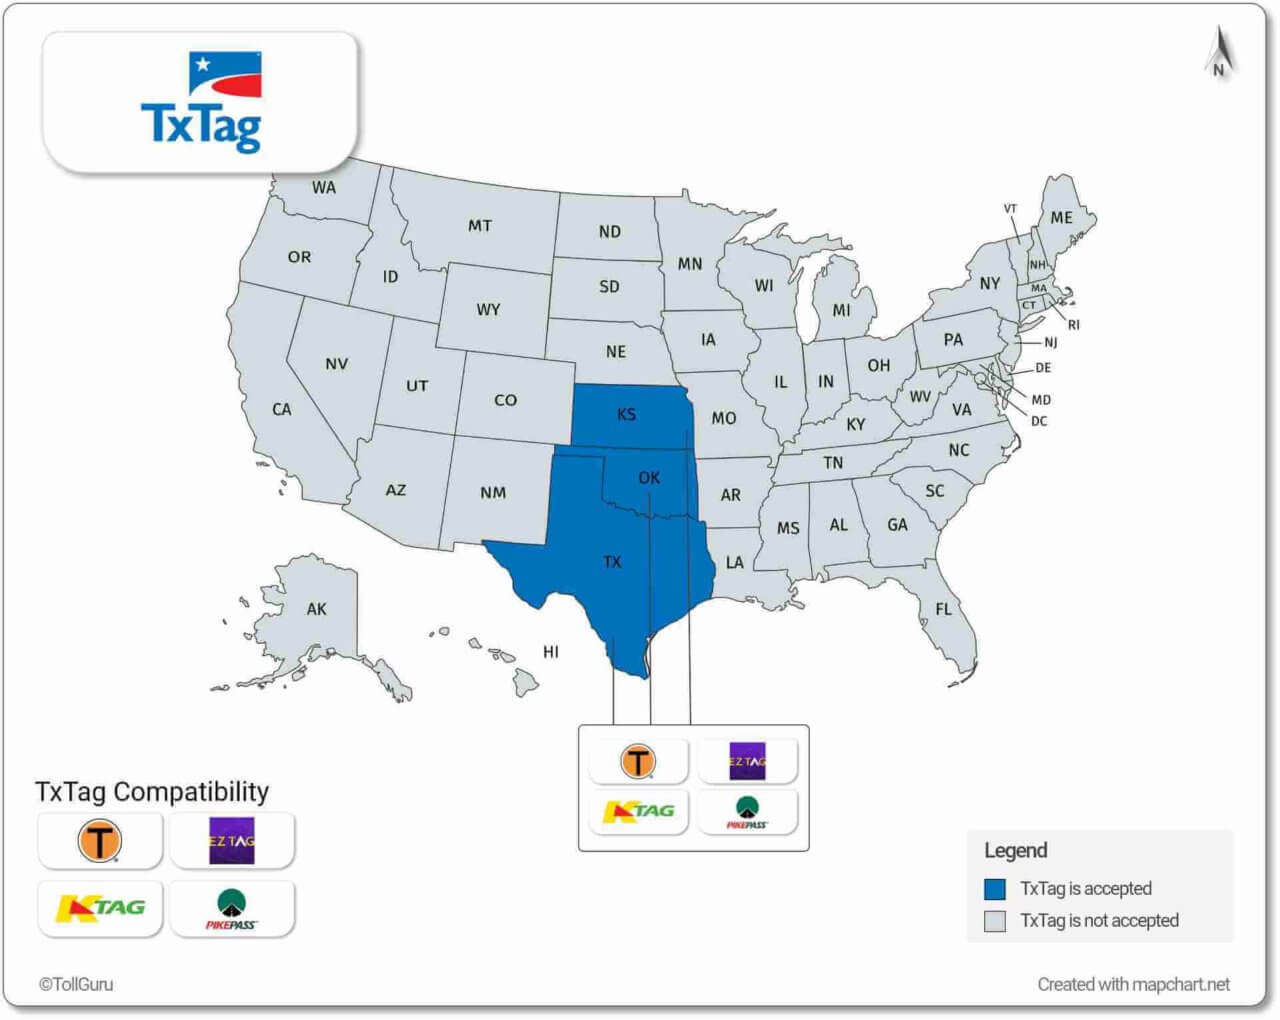 TxTag is accepted in Texas, Kansas and Oklahoma along with PikePass, TollTag, K-Tag and EZ-Tag.